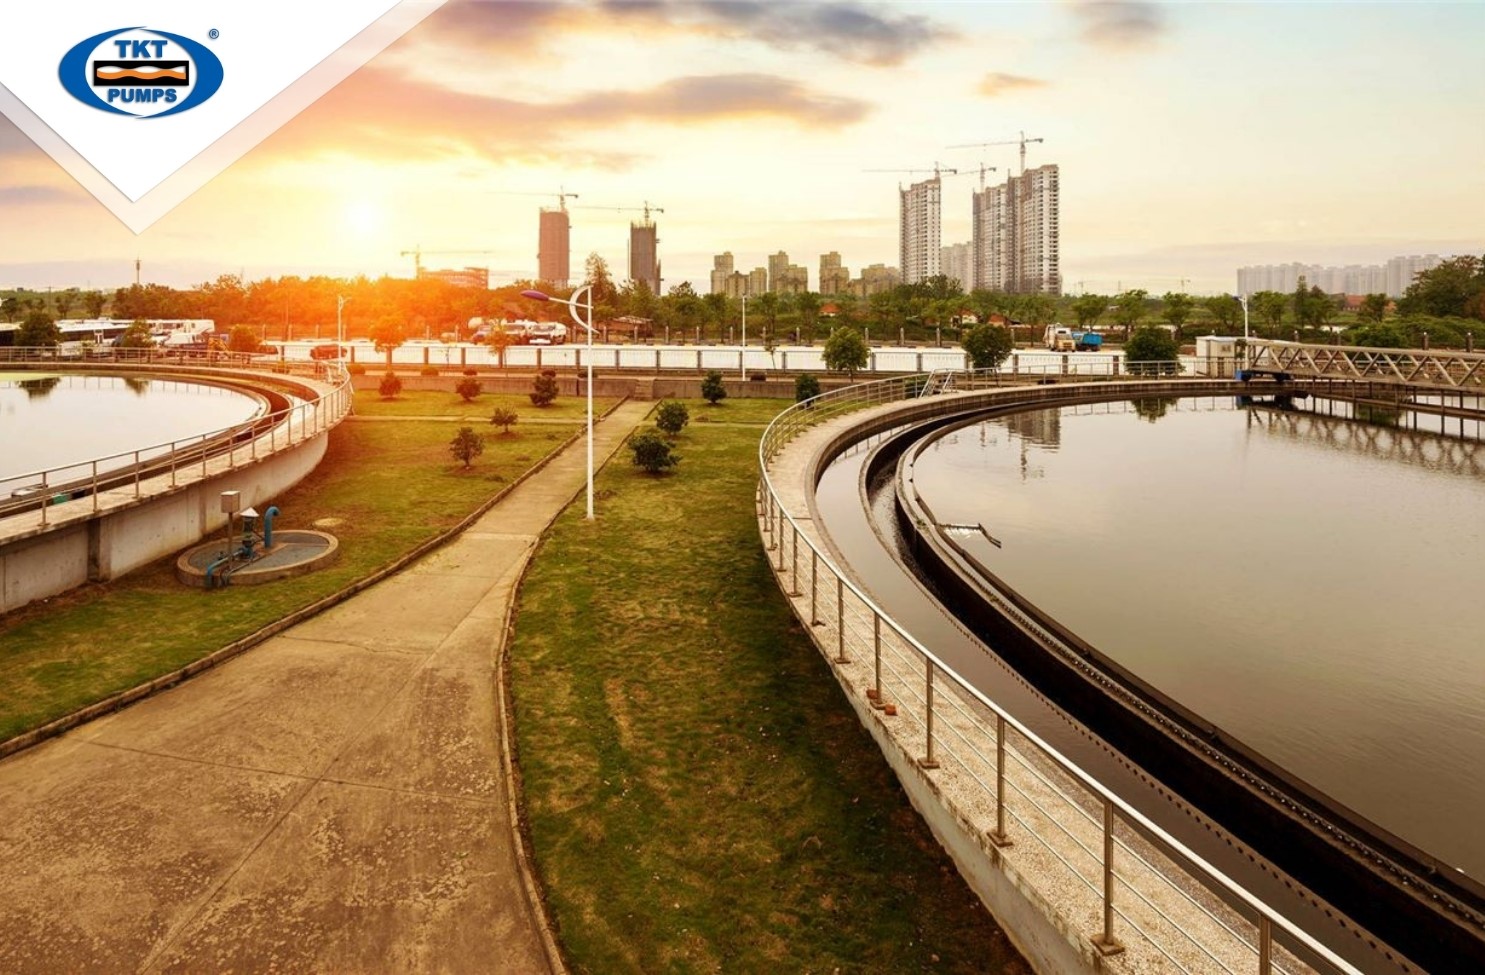 What is industrial wastewater?